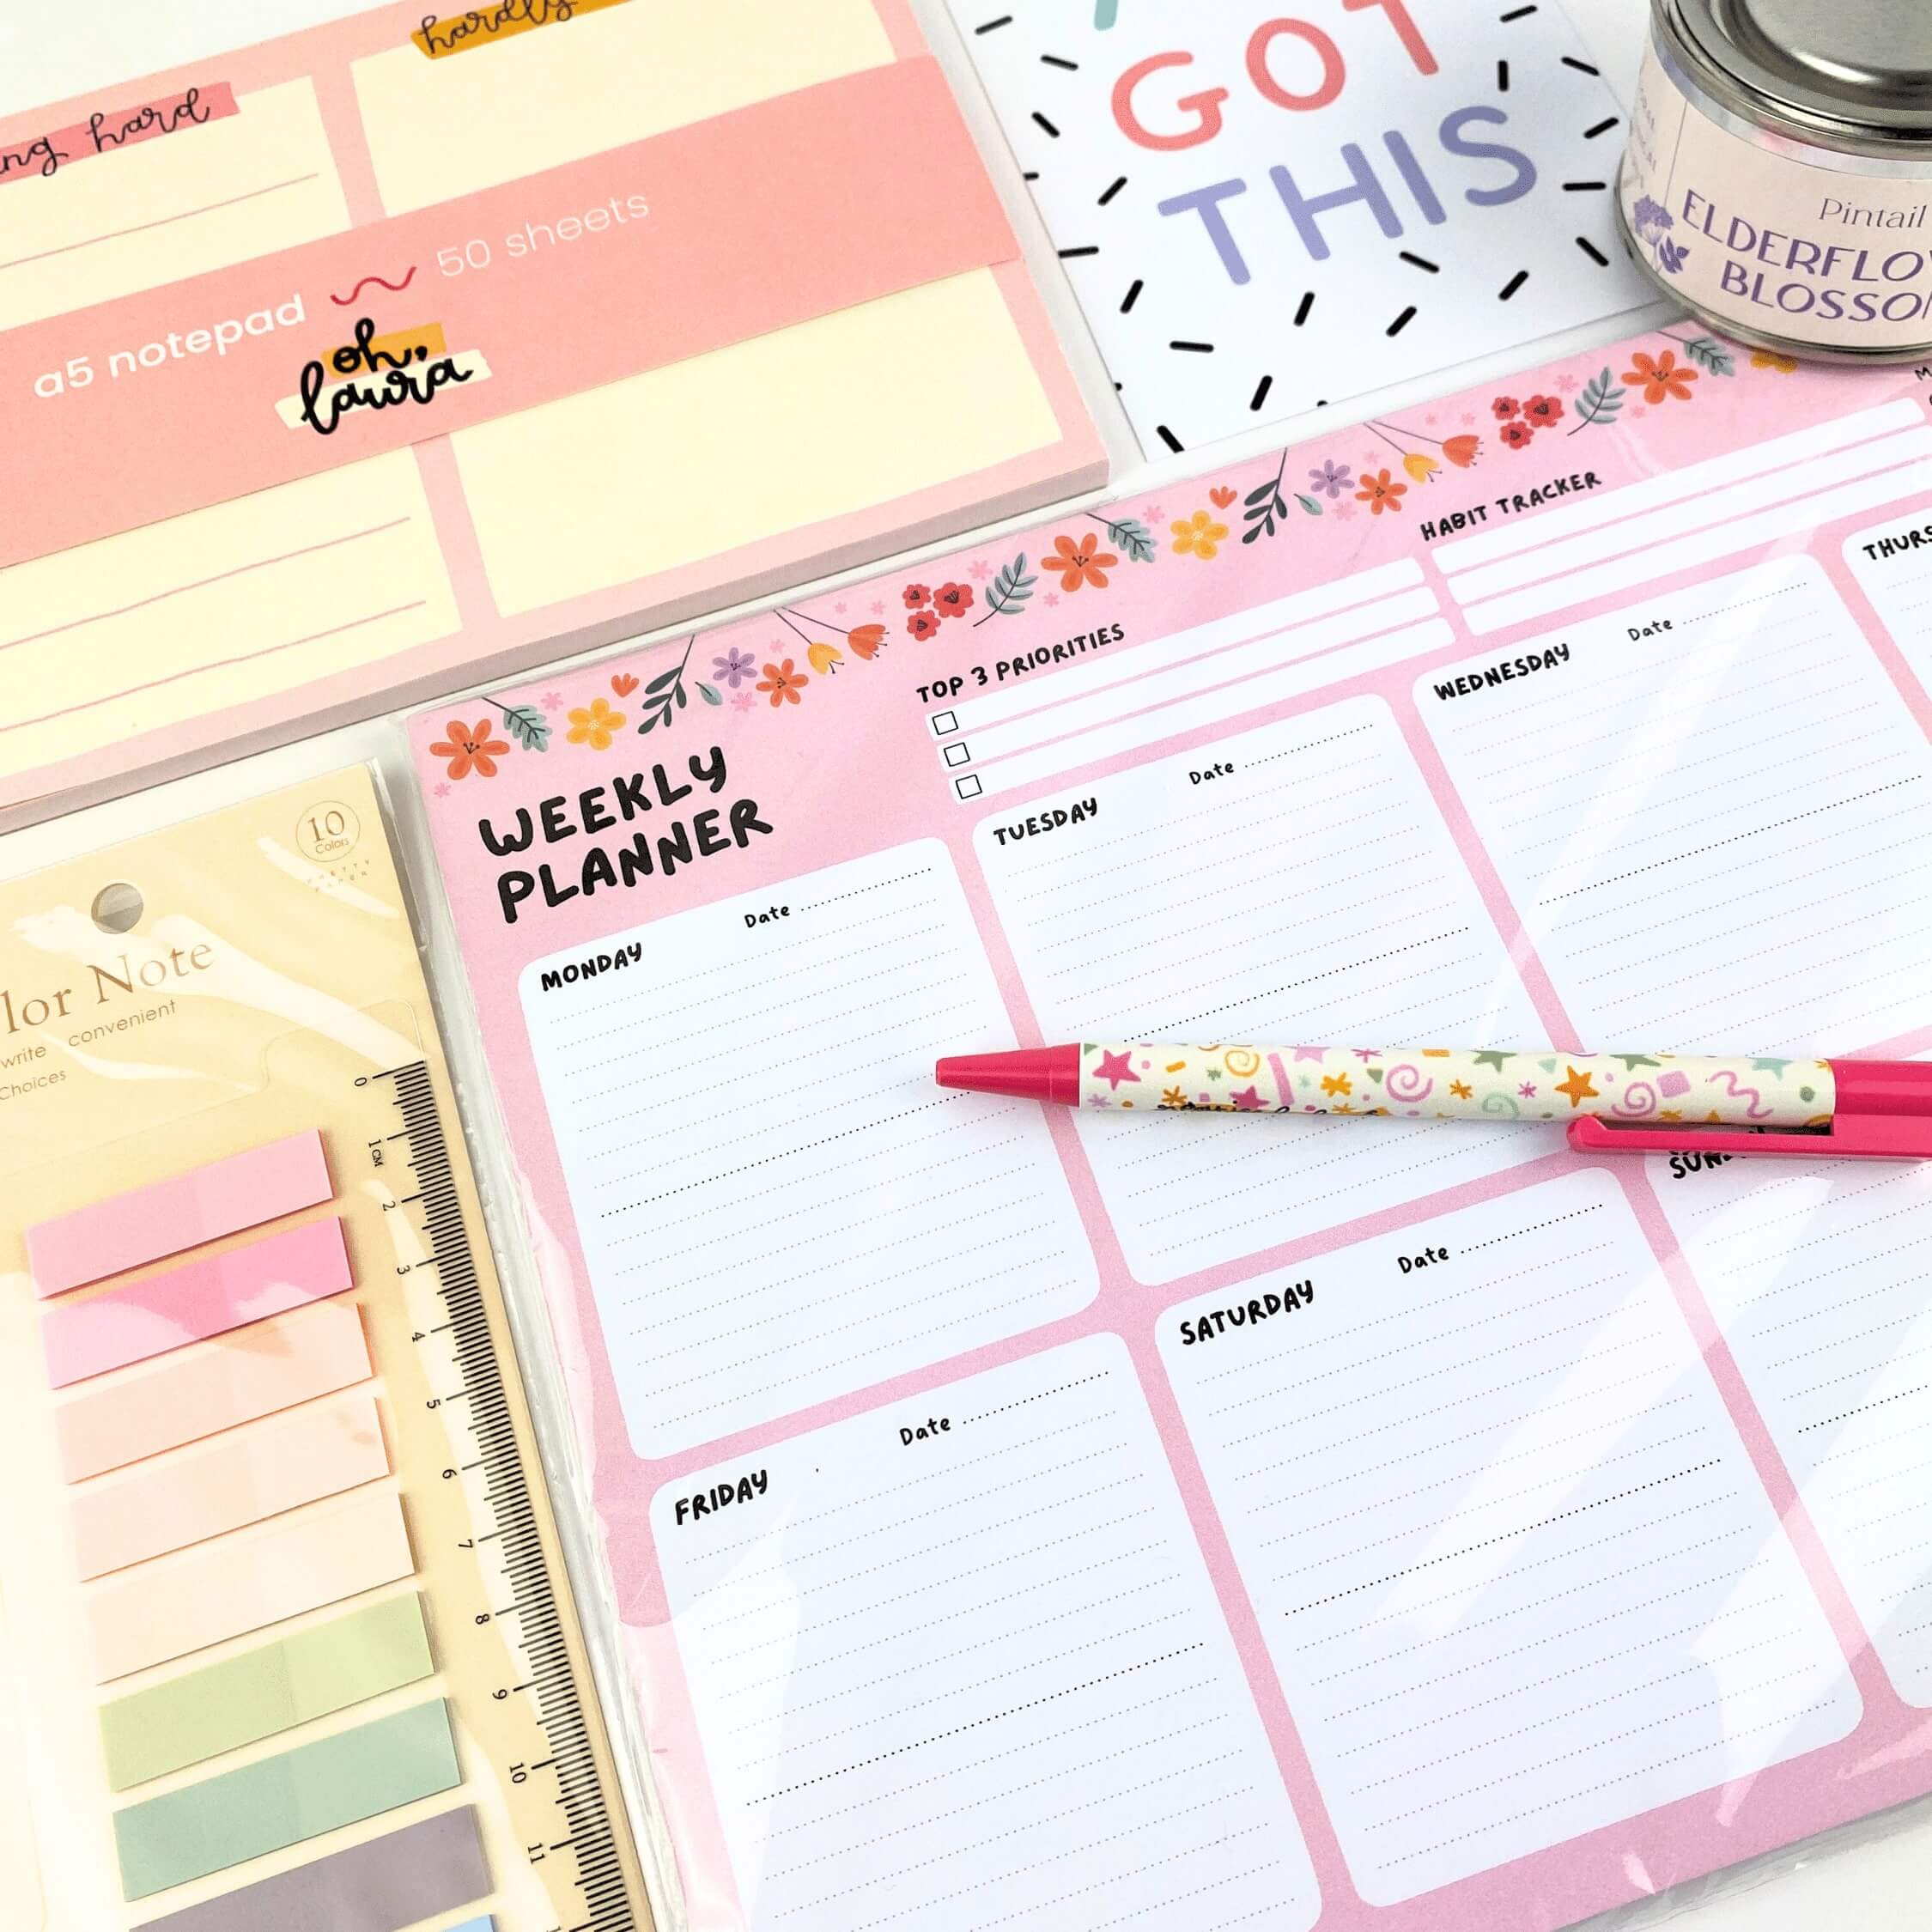 Pastel coloured desk planners, notepads and other stationery items